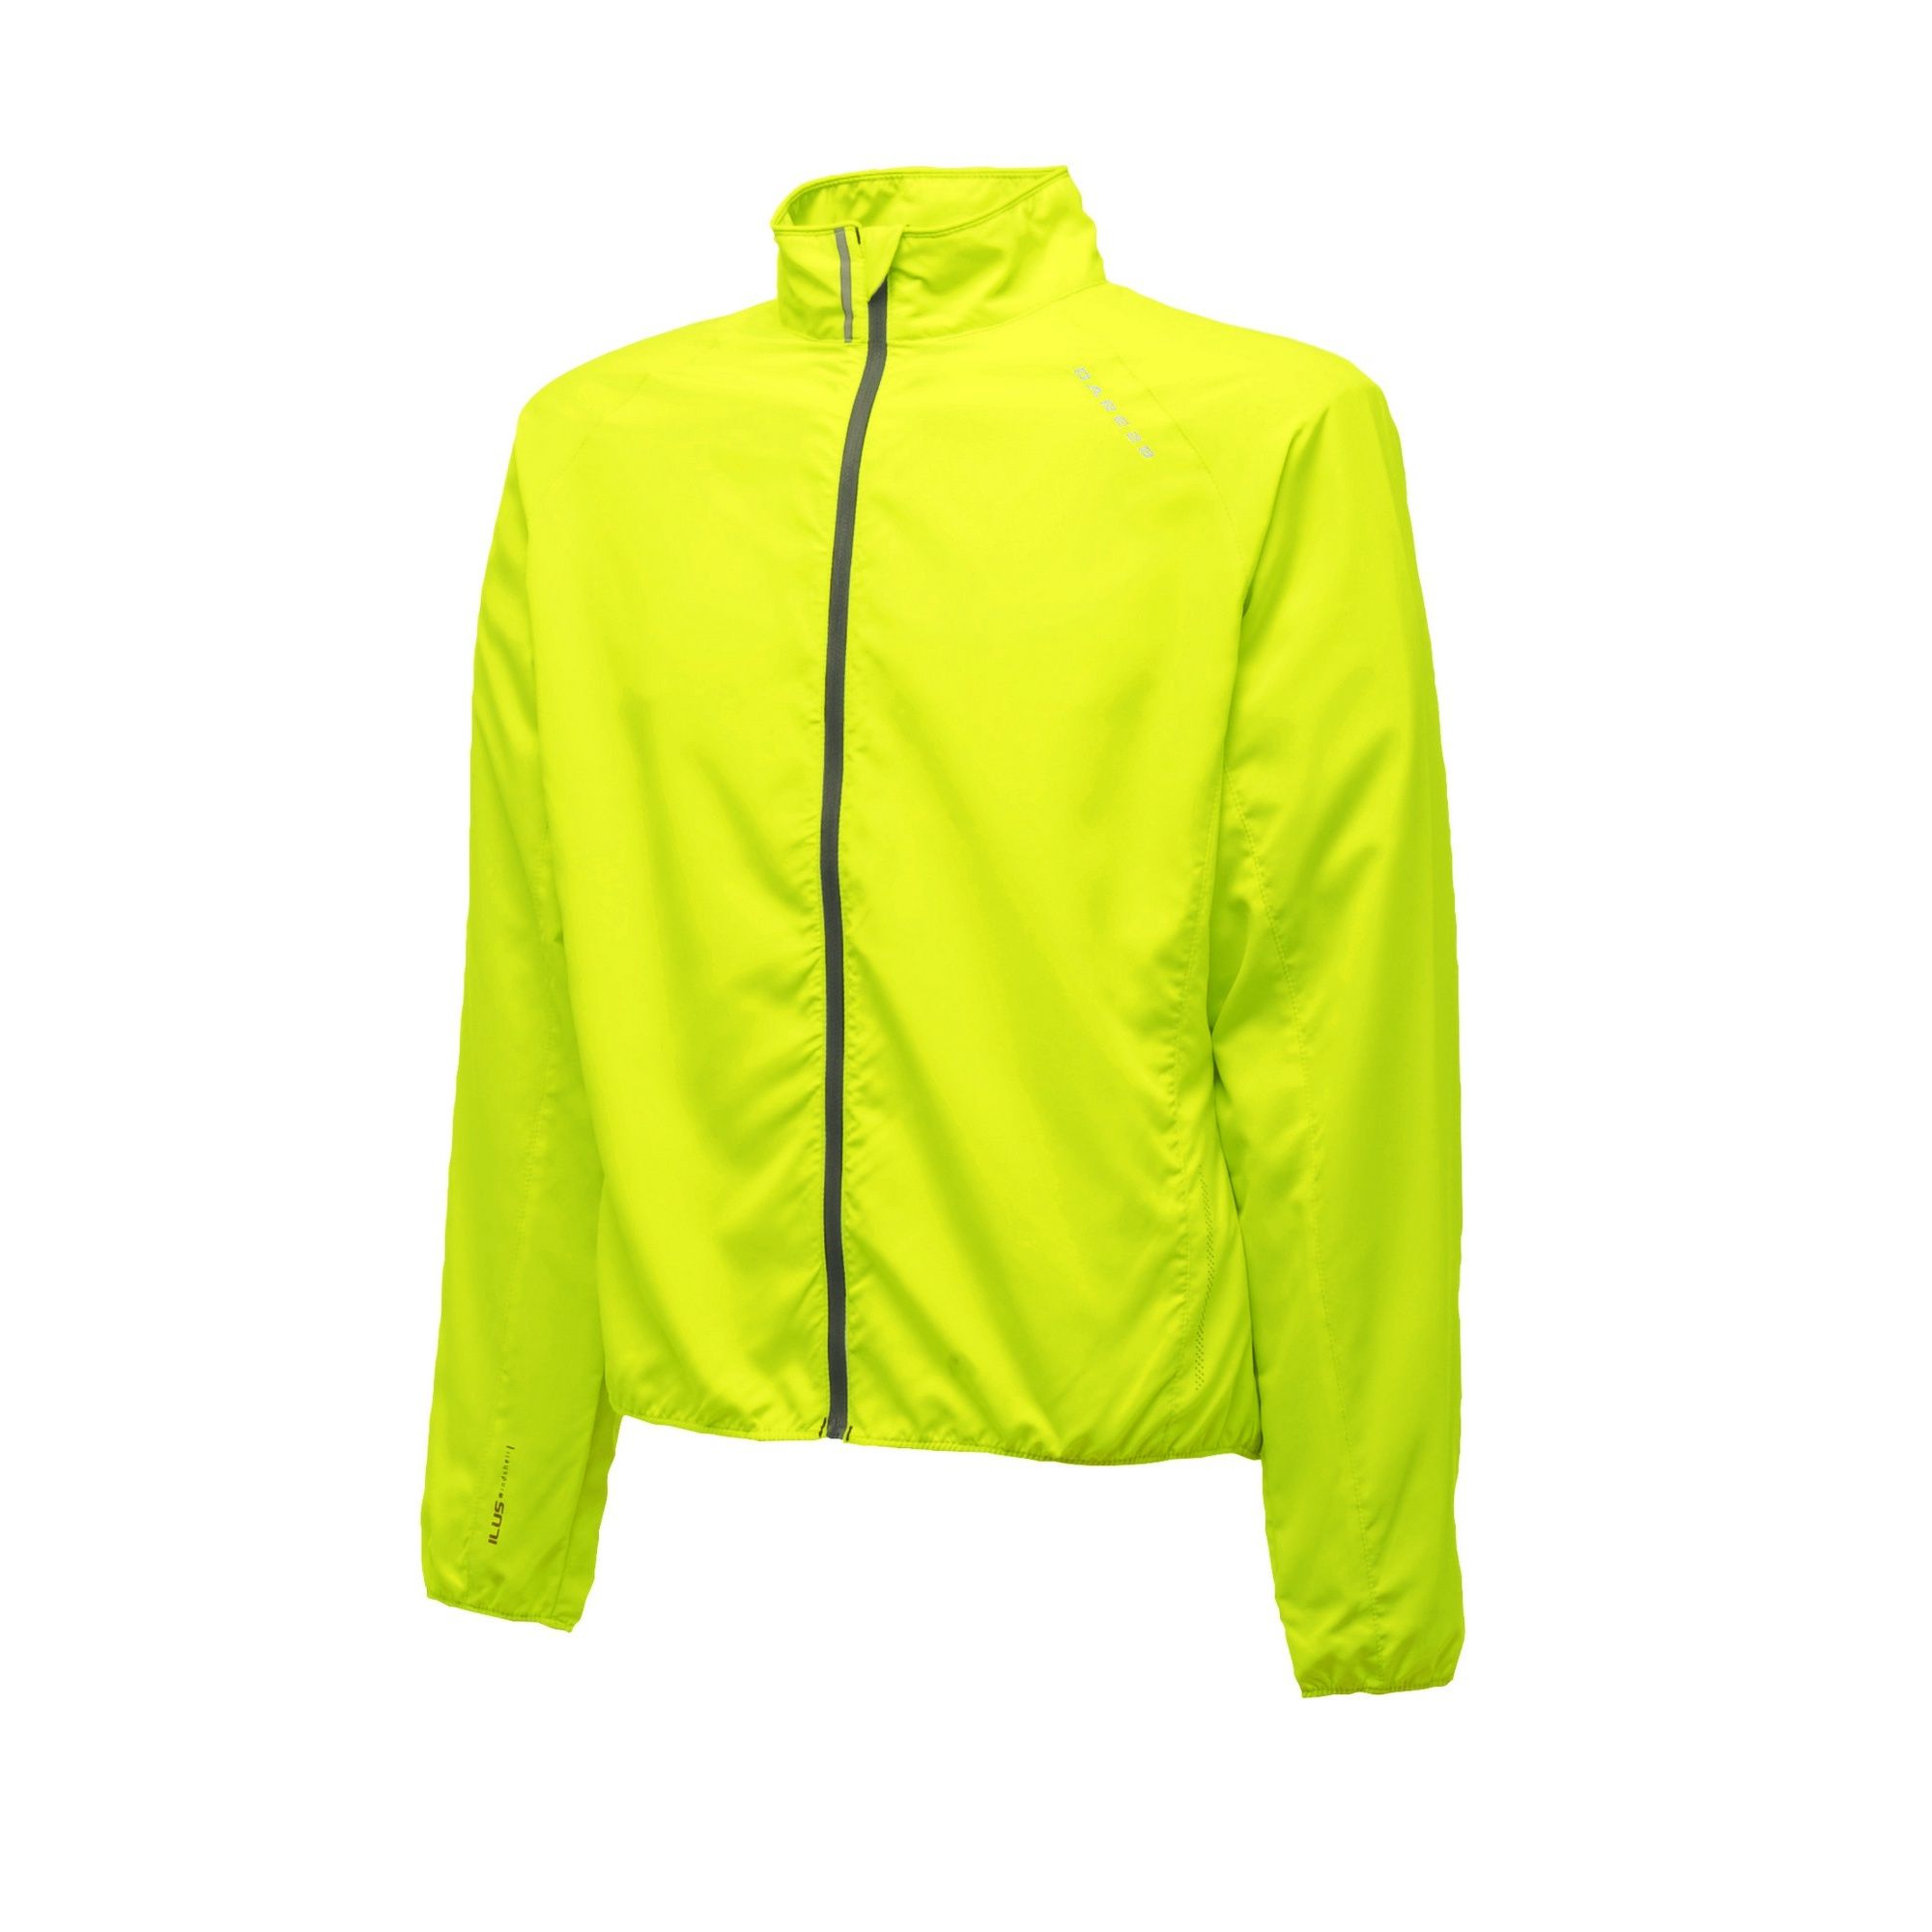 Our mens Fired Up Windshell is a super lightweight ILUS fabric jacket with a showerproof finish. Designed for all weather-commutes, rainy weekend rides or runs, it features elasticated cuffs and hem for a neat, close fit and reflective details to help keep you seen during low-light. 100% Polyester. Dare 2B Mens Sizing (chest approx): XXS (34in/86cm), XS (36in/92cm), S (38in/97cm), M (40in/102cm), L (42in/107cm), XL (44in/112cm), XXL (47in/119cm), XXXL (50in/127cm), XXXXL (53in/134cm), XXXXXL (56in/142cm).